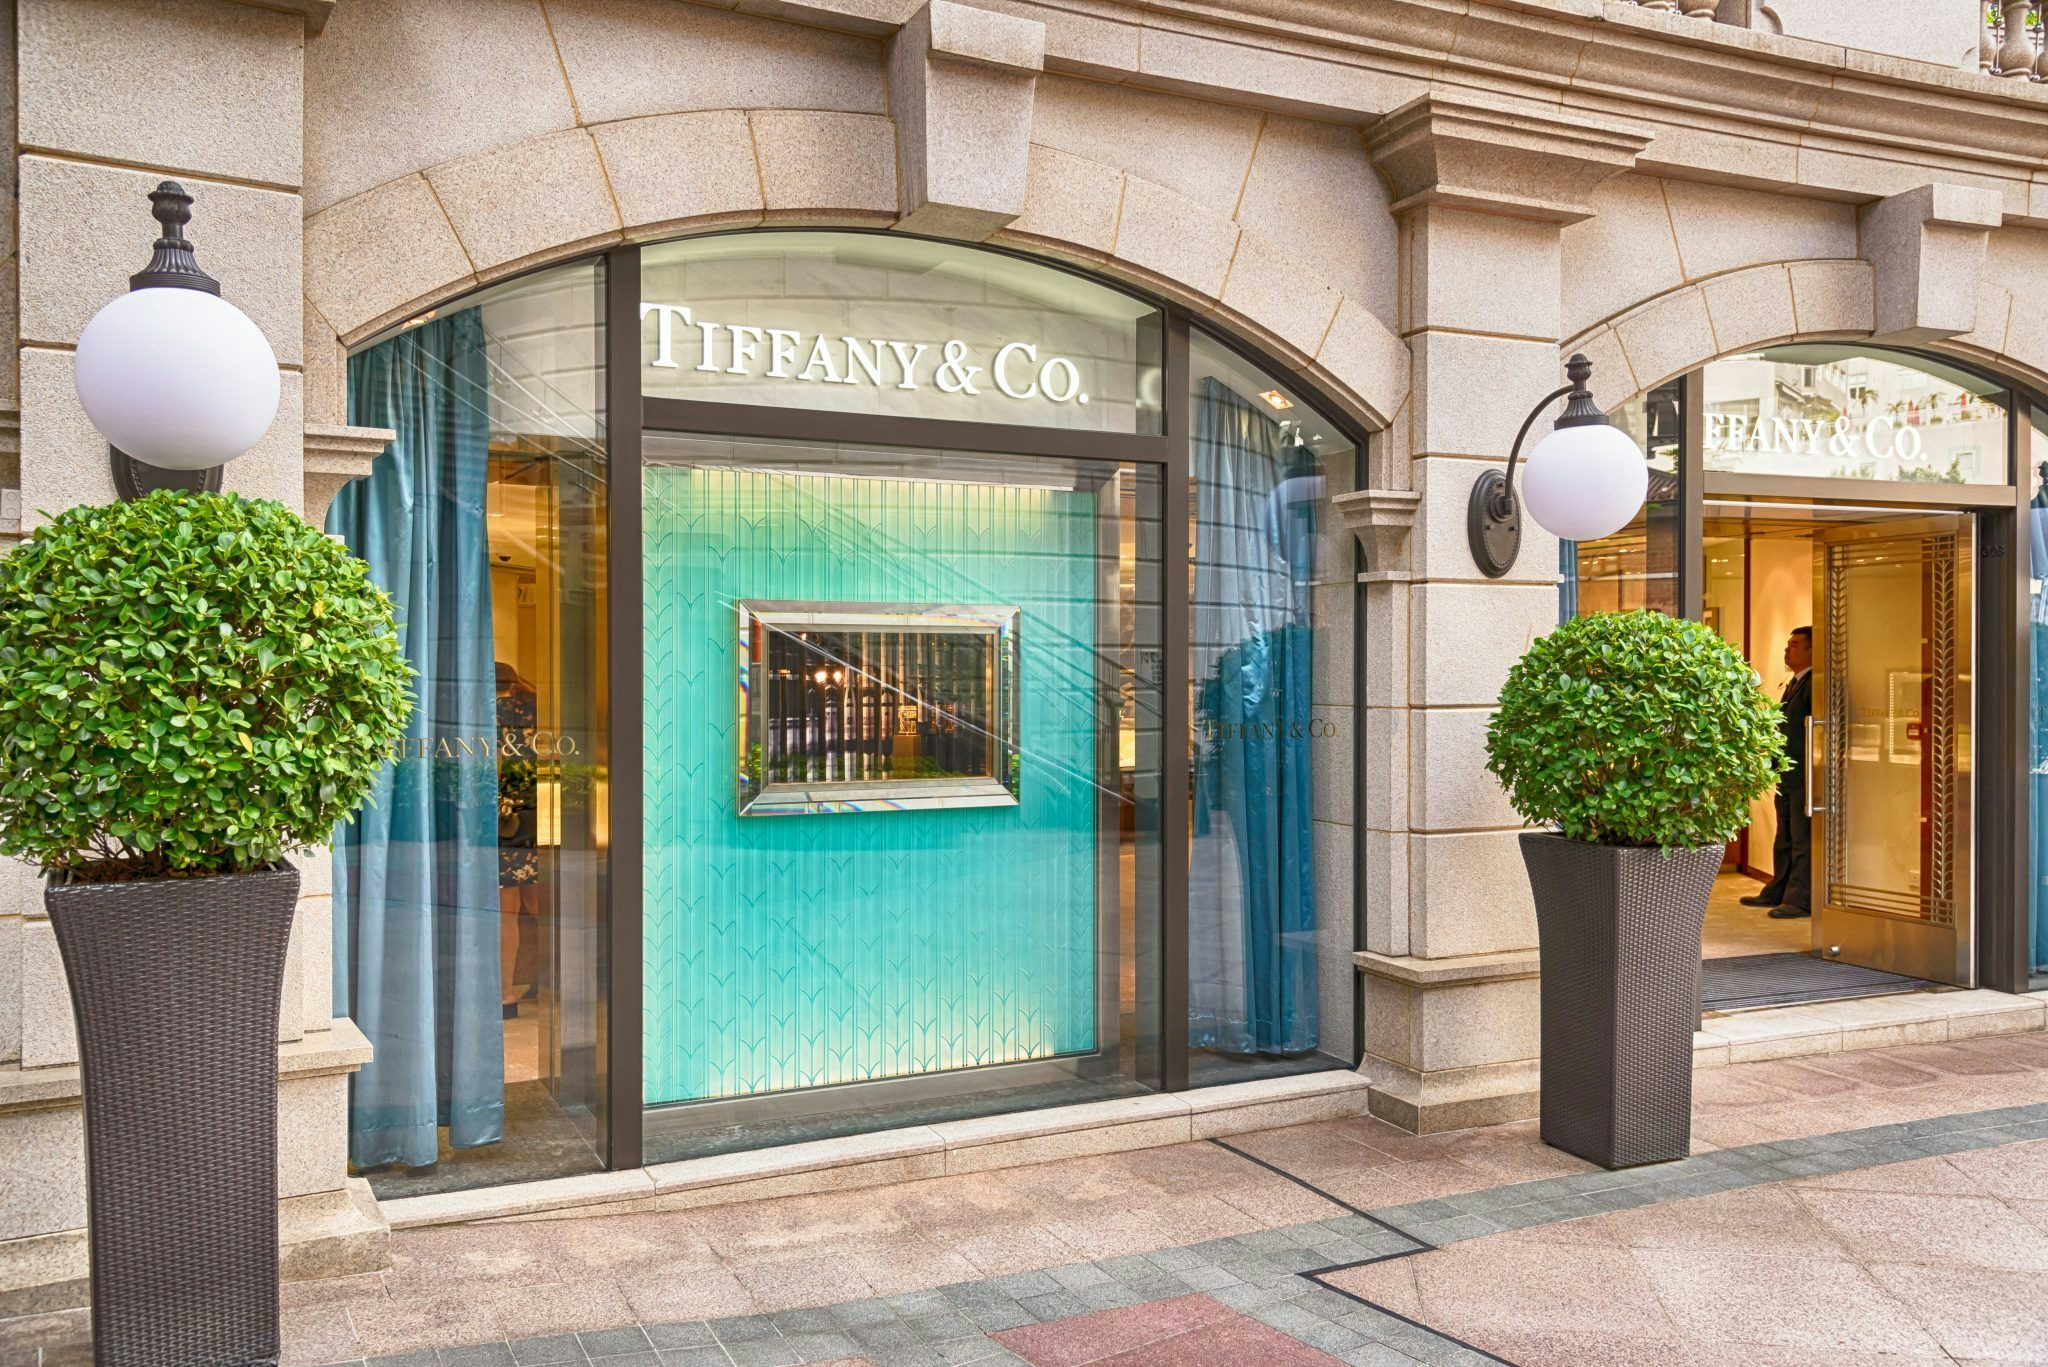 Tiffany Seen Likely to Benefit from U.S. China Trade War